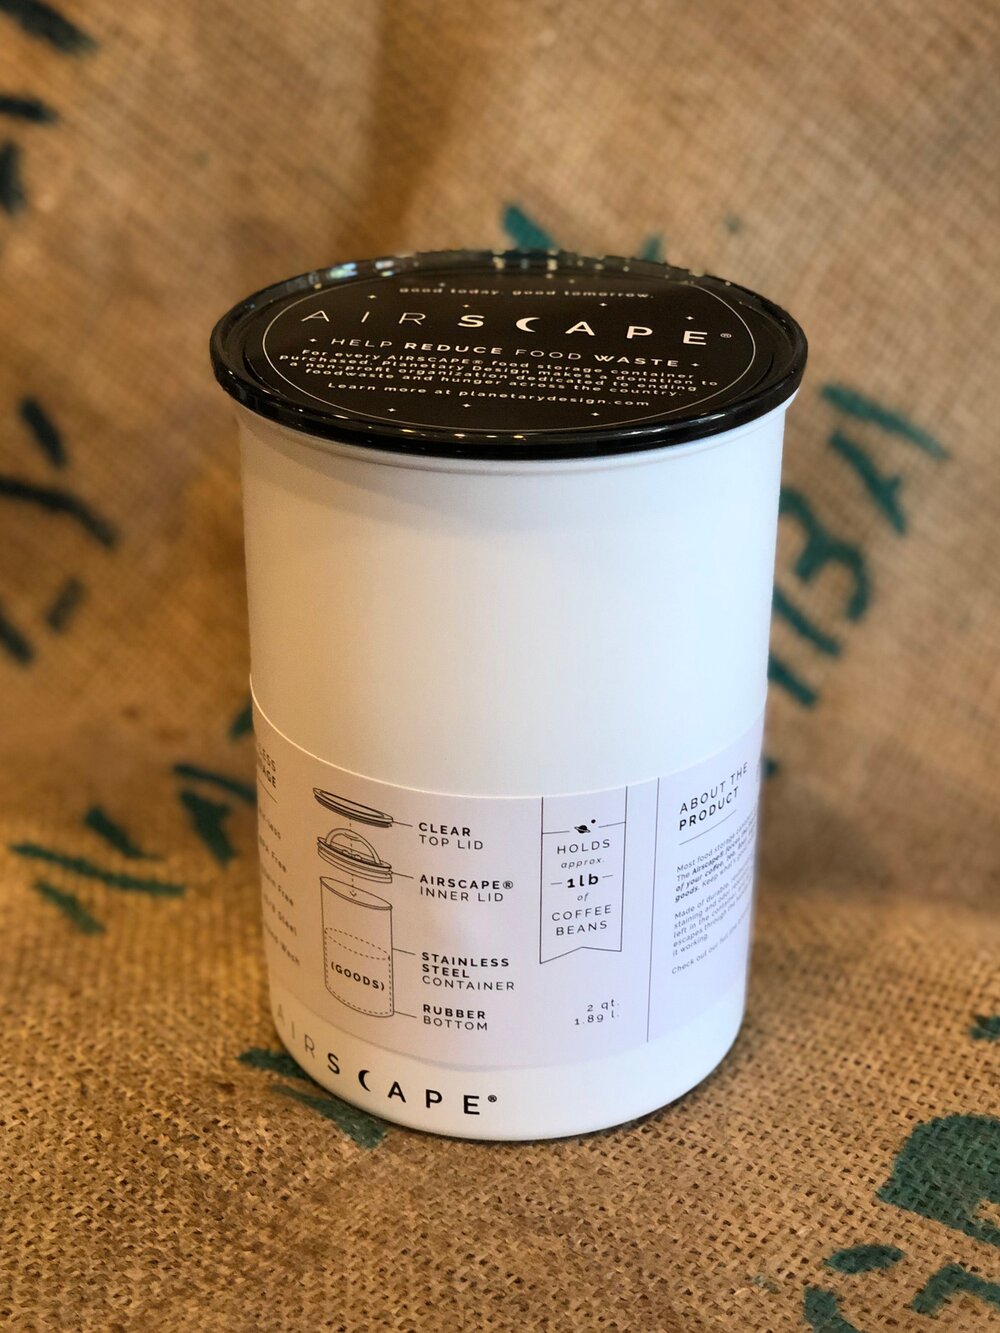 Planetary Designs Airscape Kilo - 1 Kg Coffee Bean Canister - Matte Black